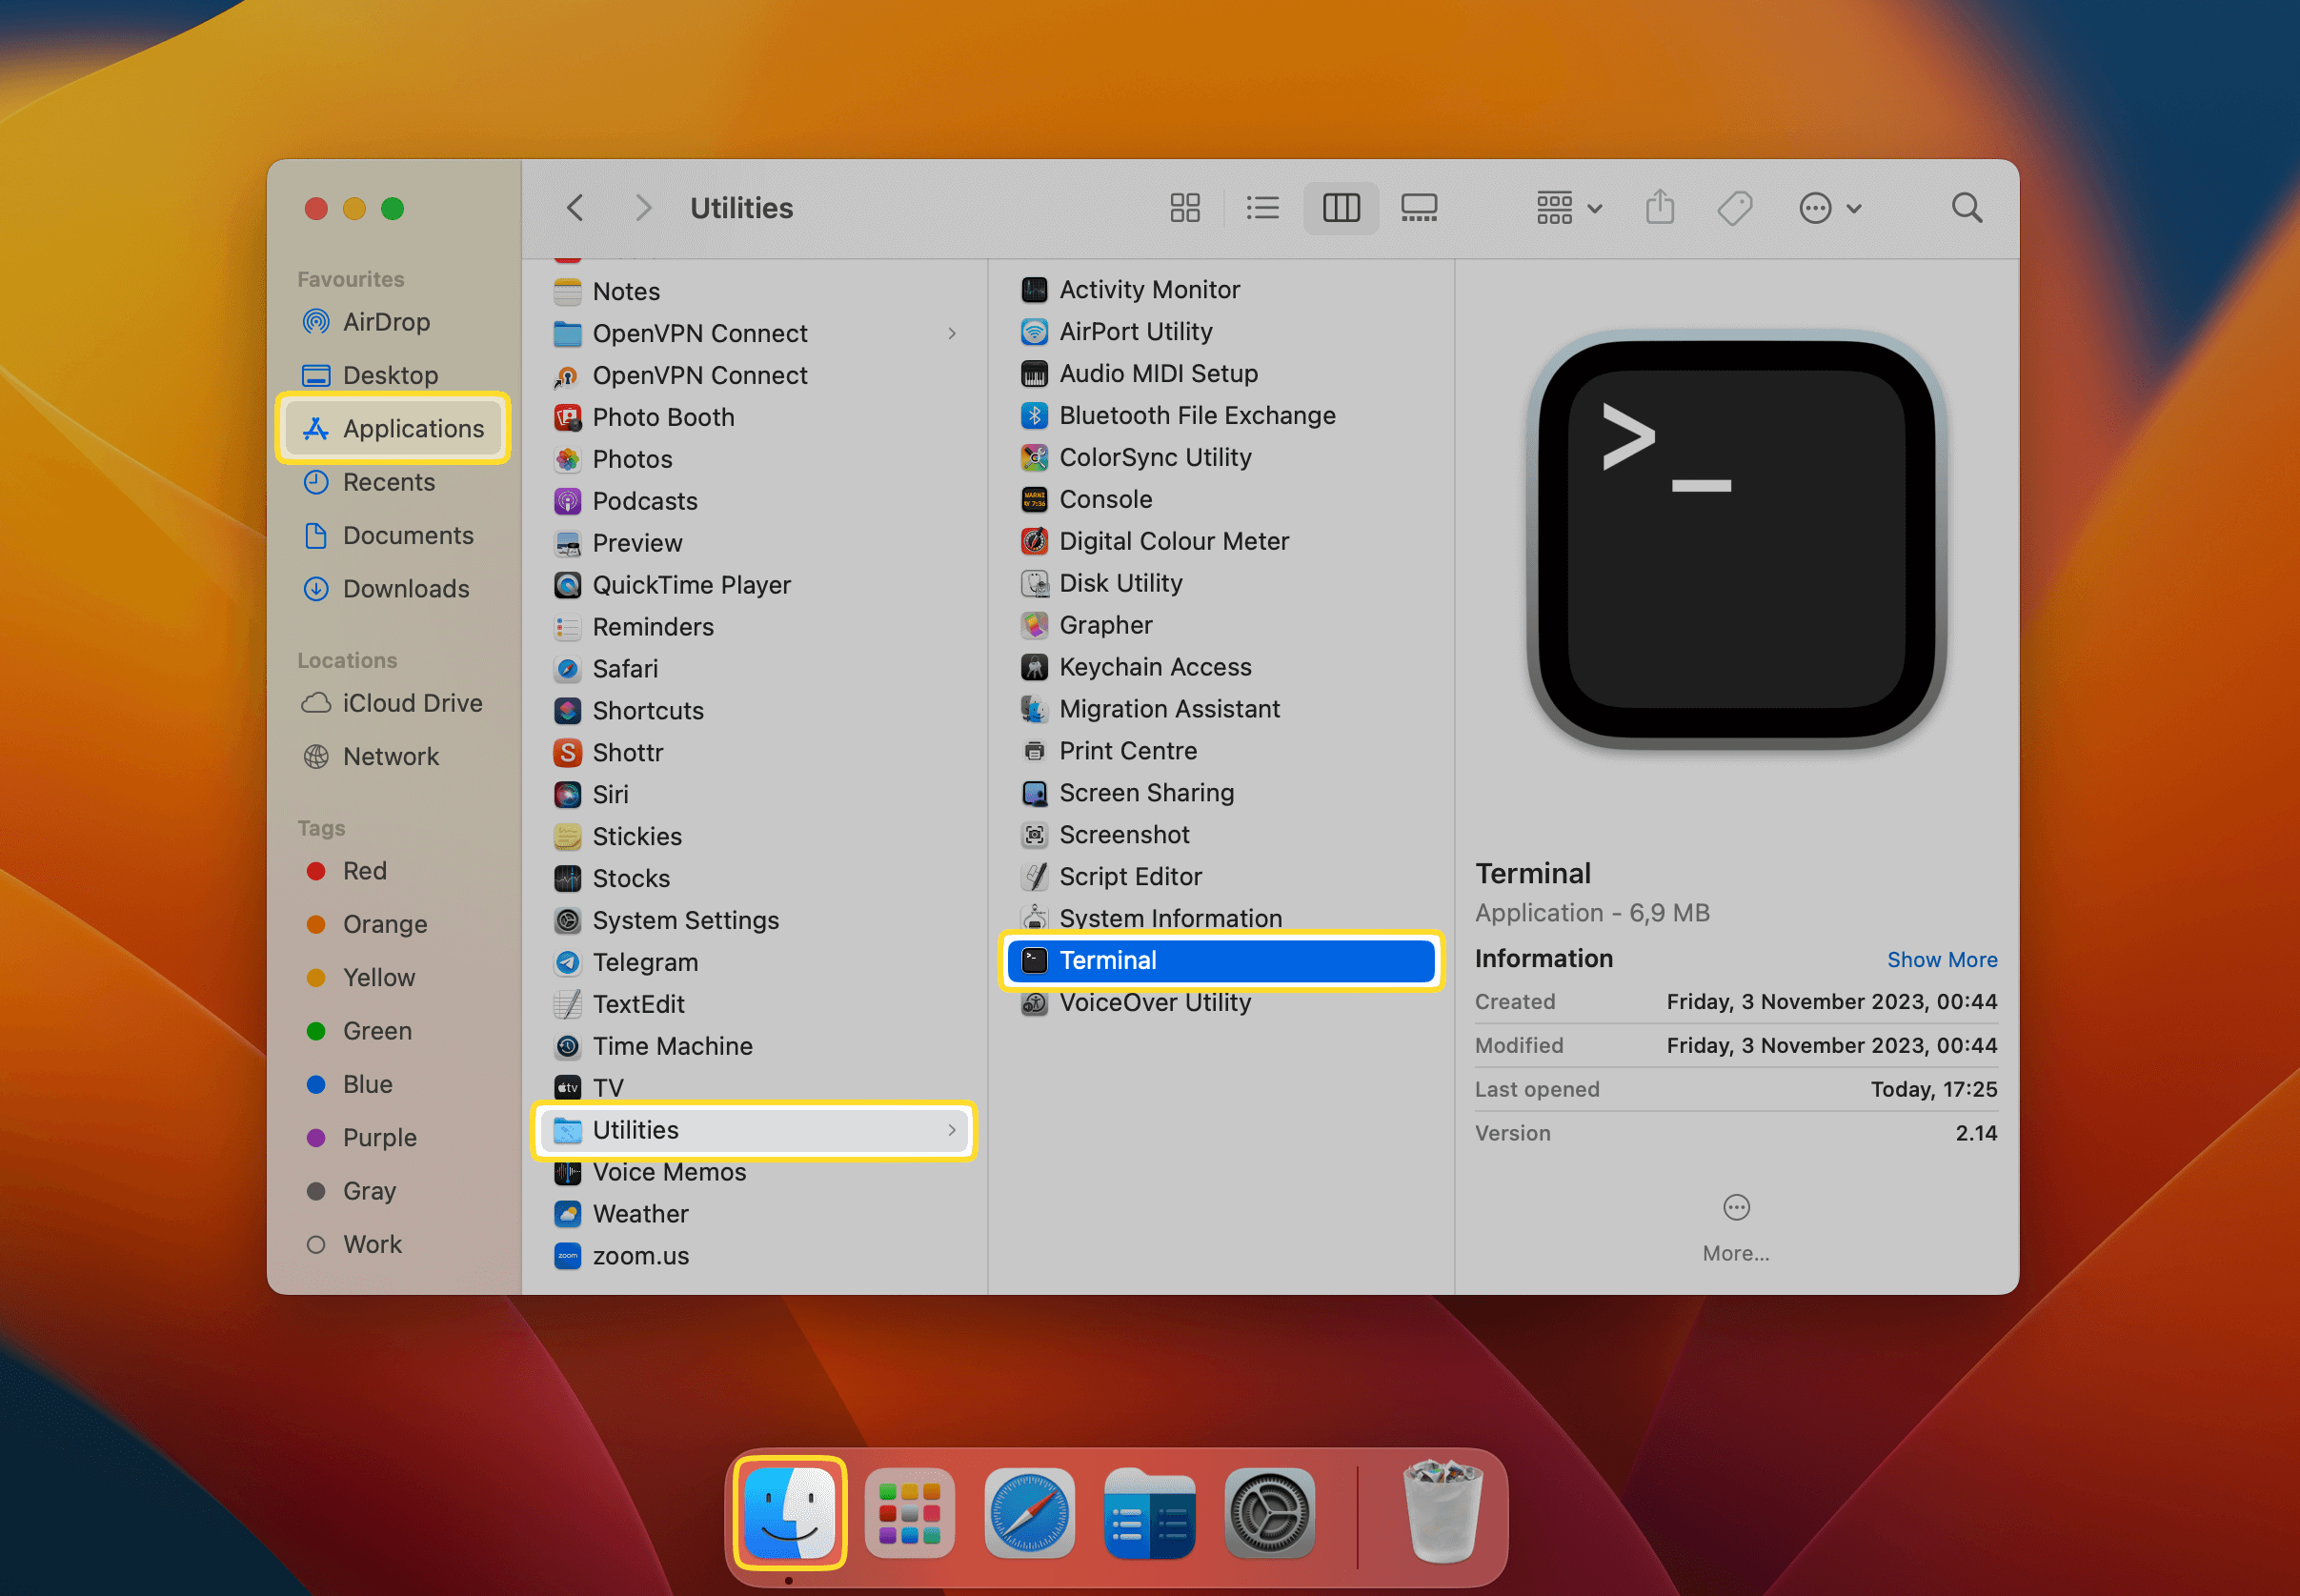 The Terminal app is highlighted in the Utilities folder inside the Applications